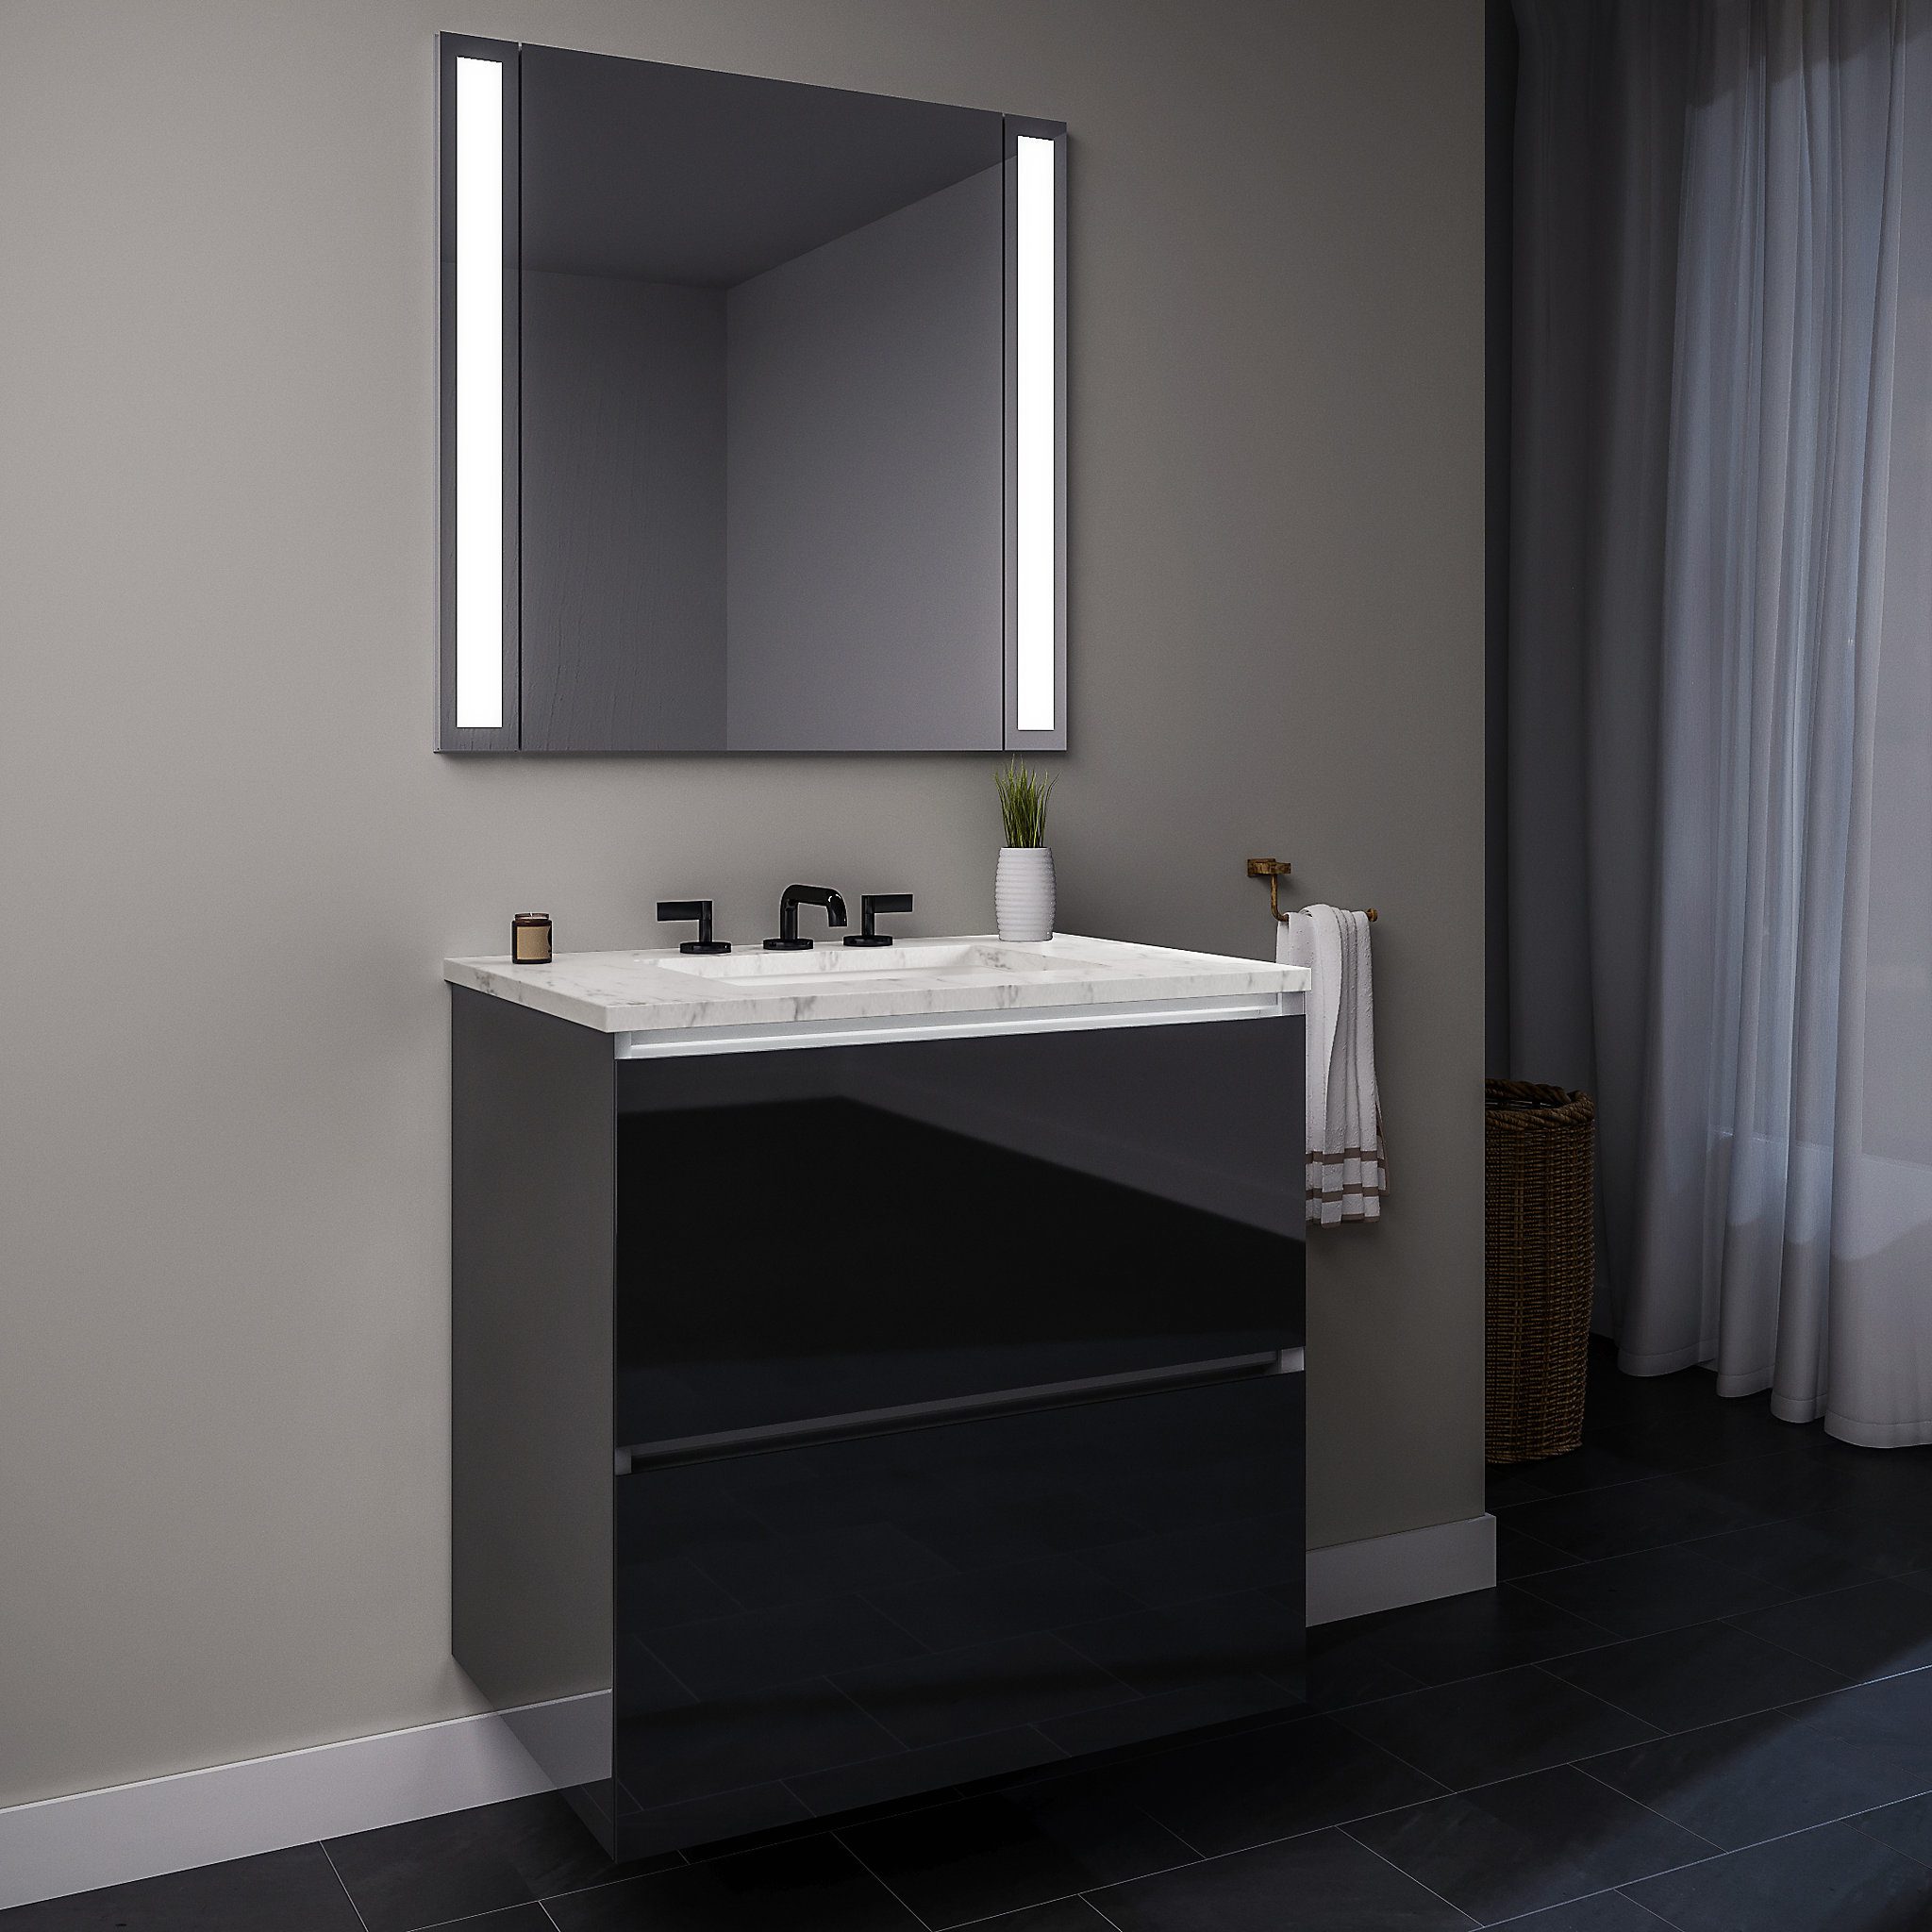 Robern 30119400TB00002 Curated Cartesian Vanity, 30" x 15" x 21", Two Drawer, Tinted Gray Mirror Glass, Plumbing Drawer, Full Dr